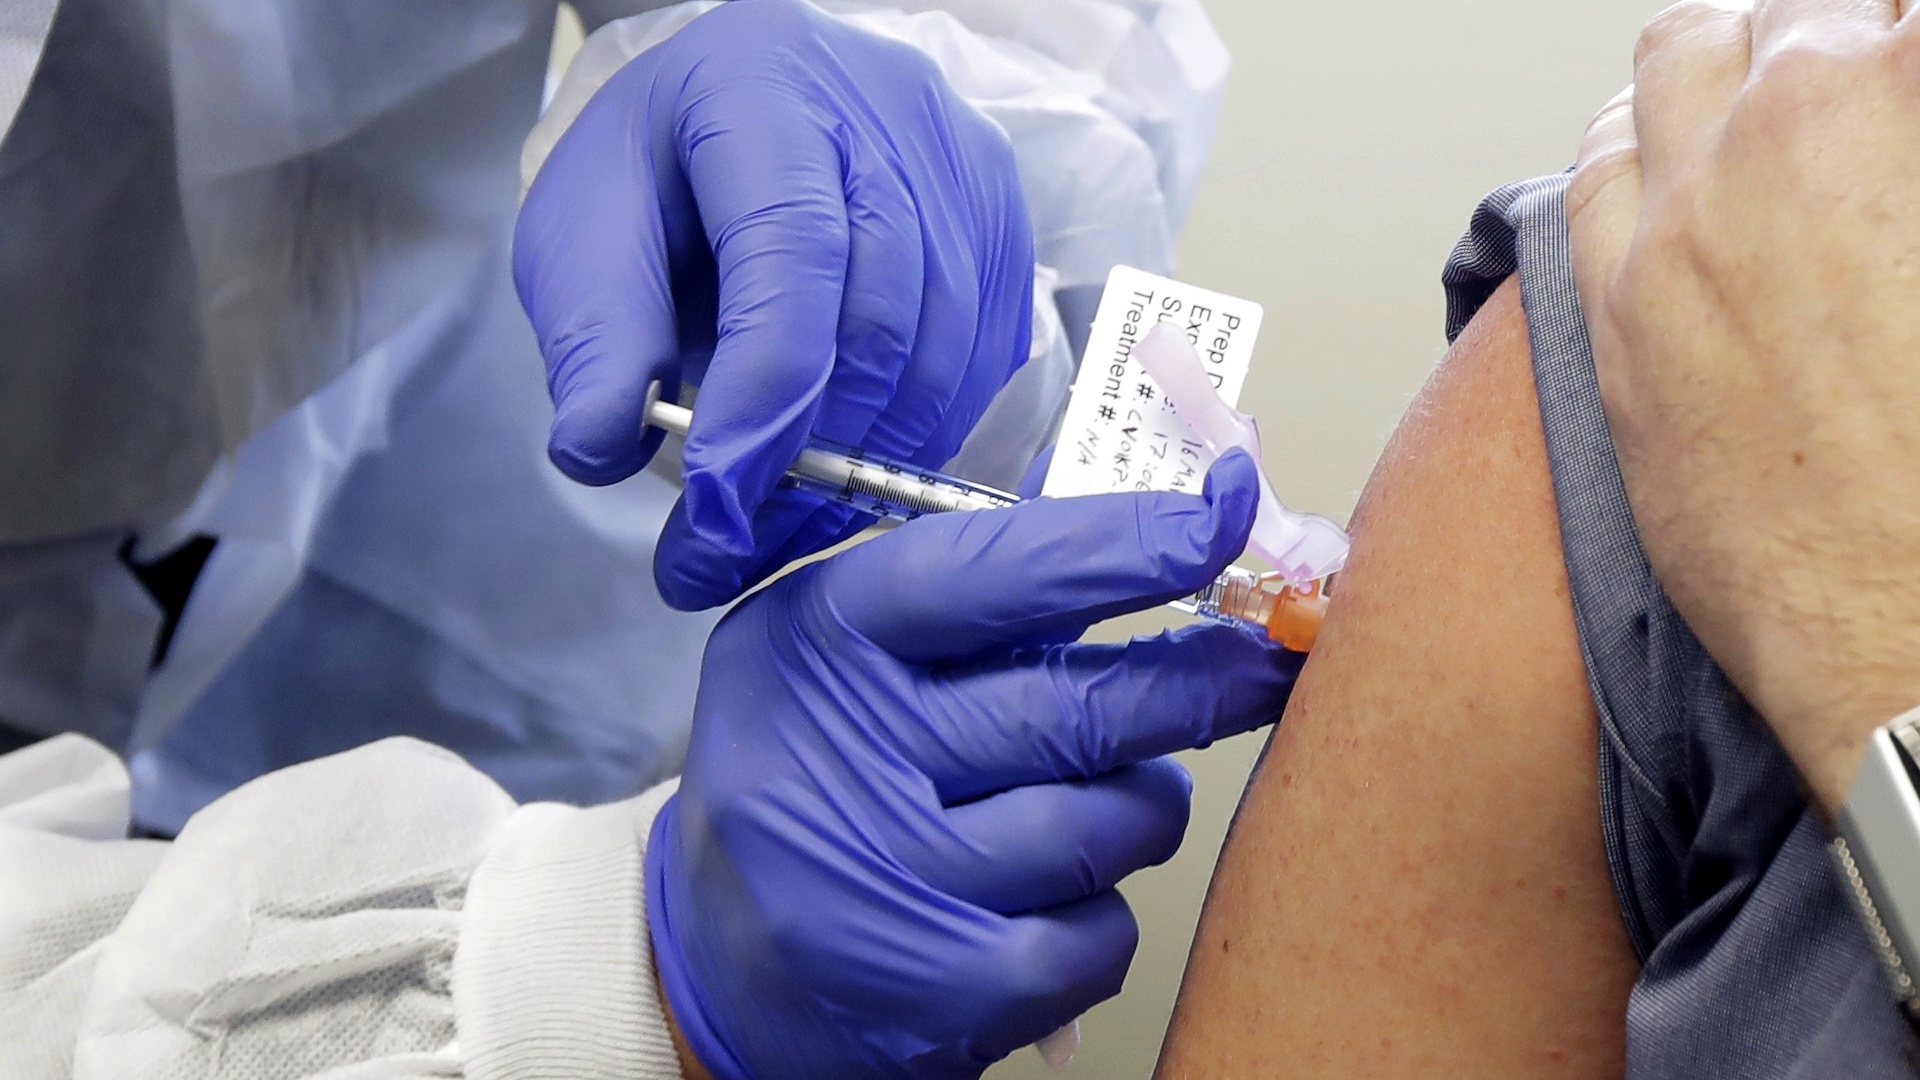 In this March 16, 2020, file photo, a patient receives a shot in the first-stage safety study clinical trial of a potential vaccine for COVID-19, the disease caused by the new coronavirus, at the Kaiser Permanente Washington Health Research Institute in Seattle. (AP Photo/Ted S. Warren, File)